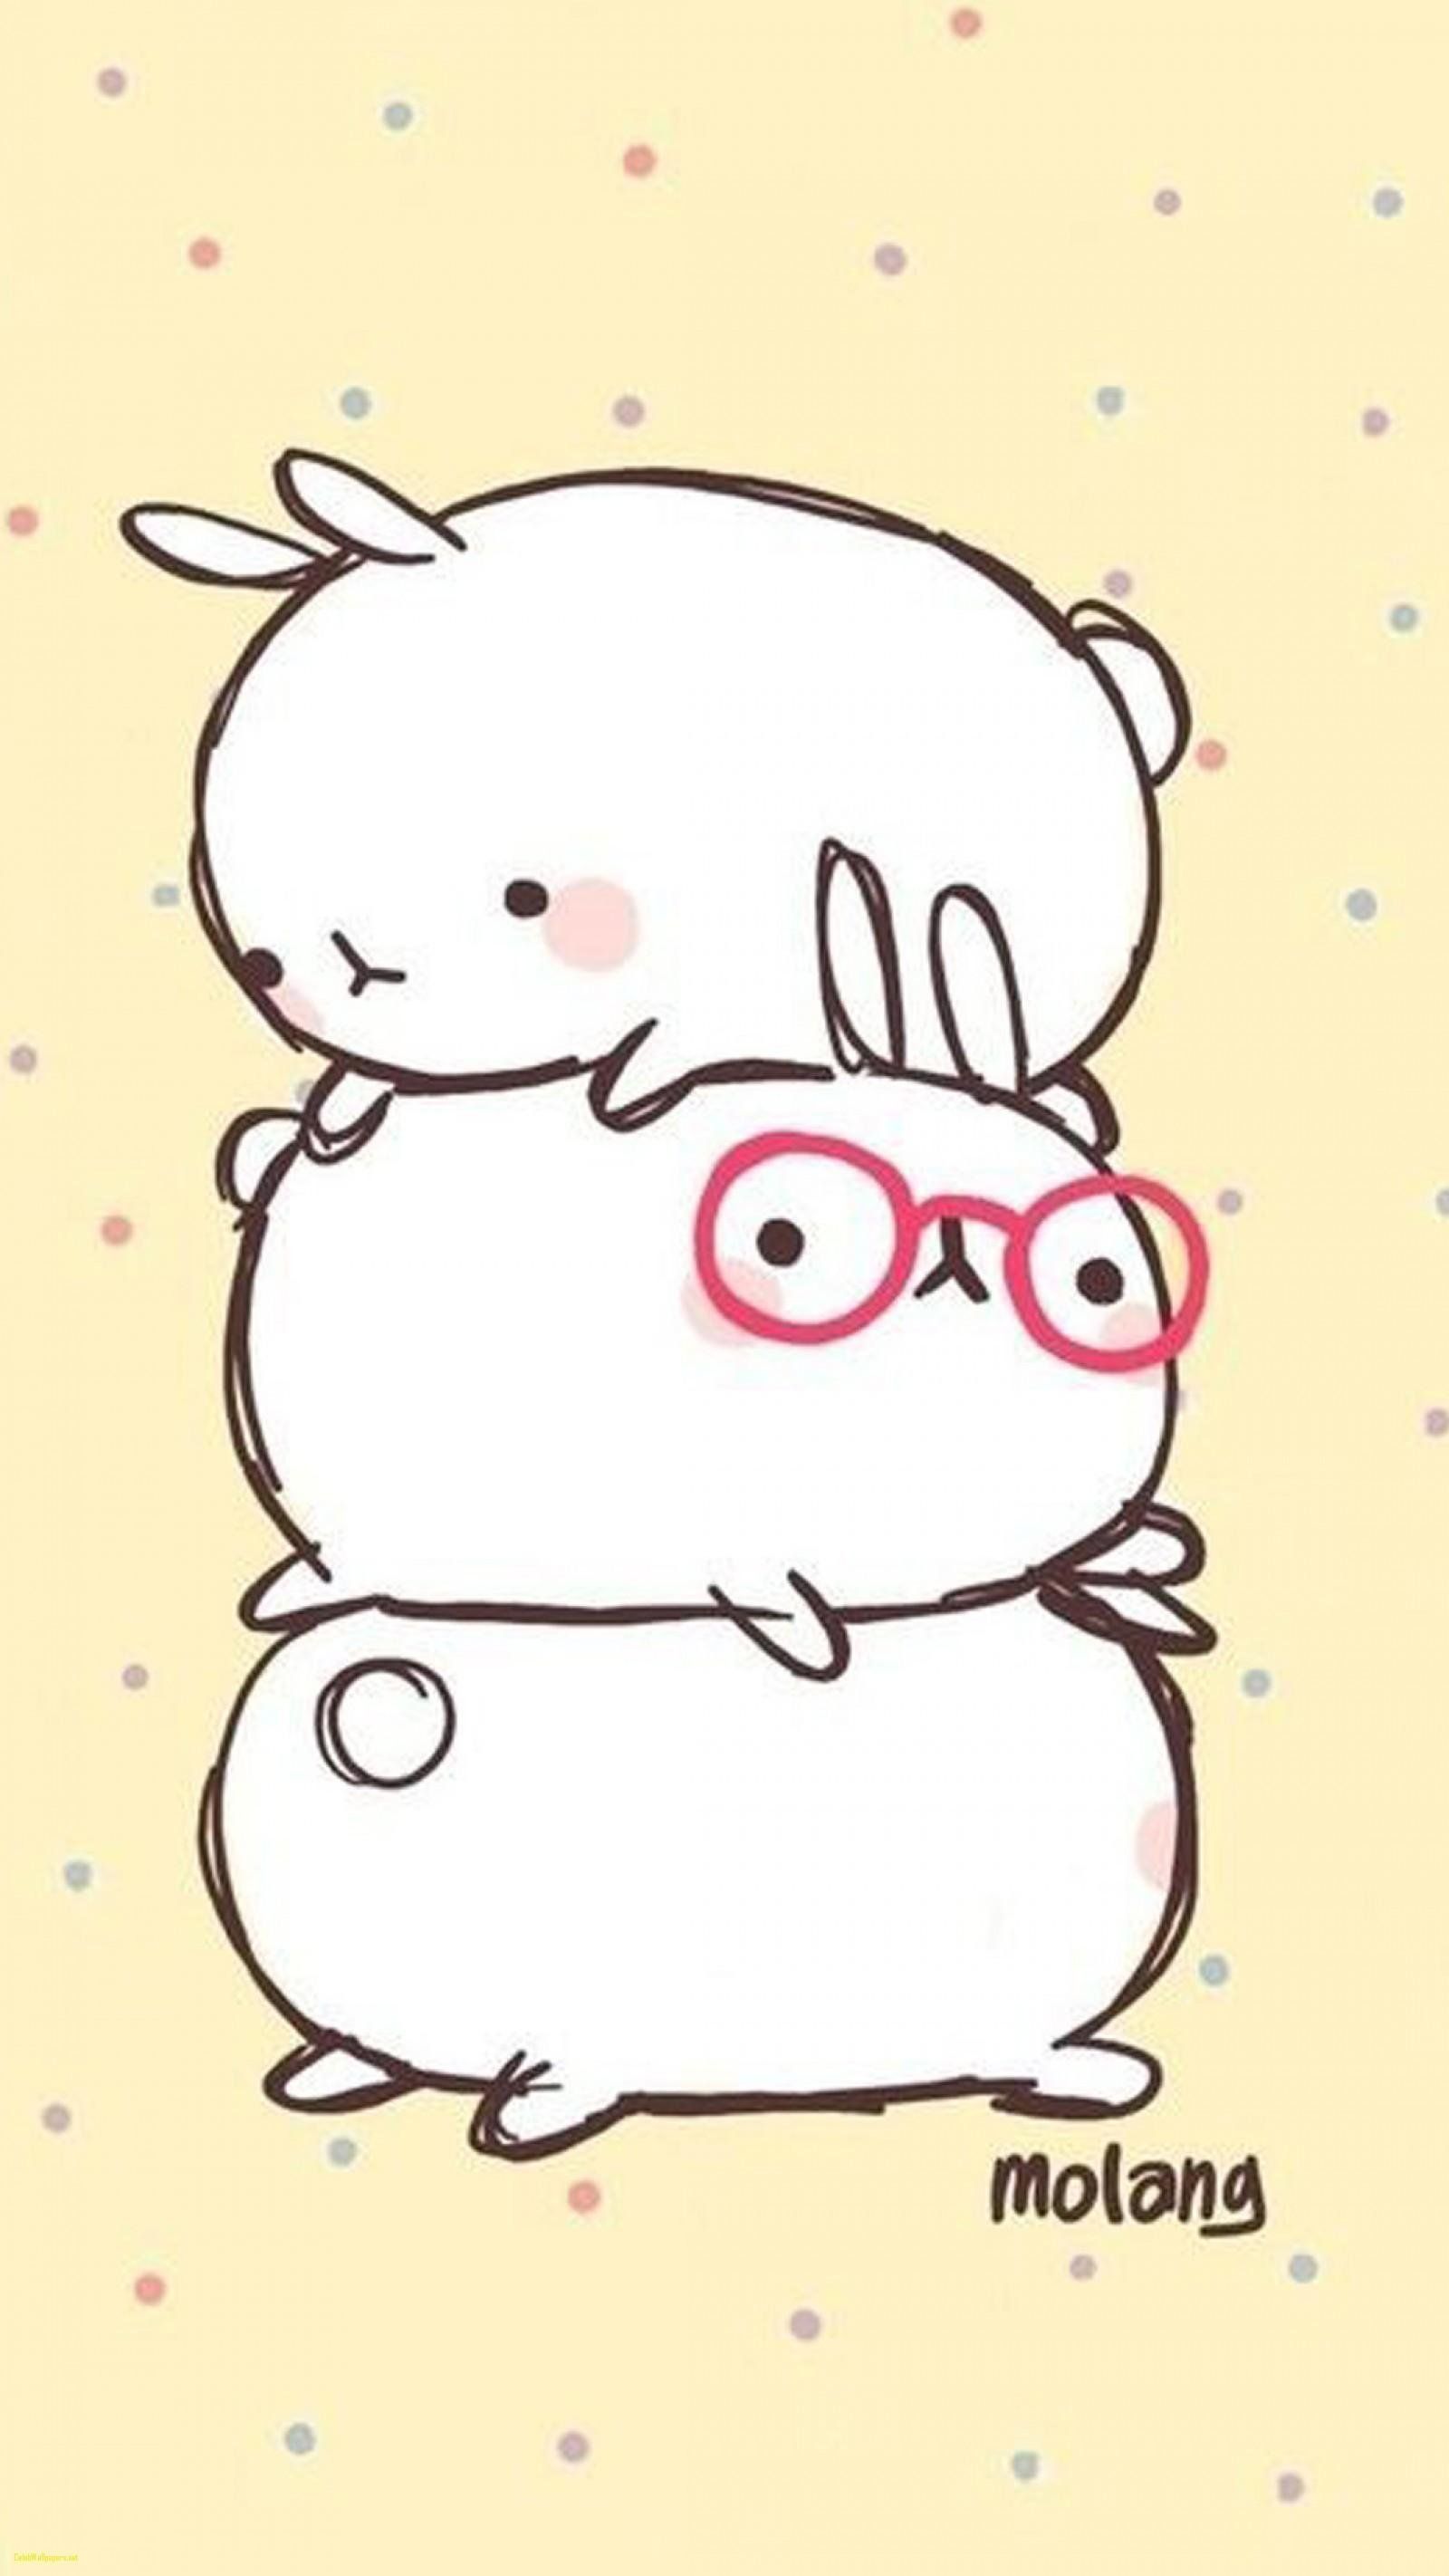 A drawing of three white rabbits in a stack. - Molang